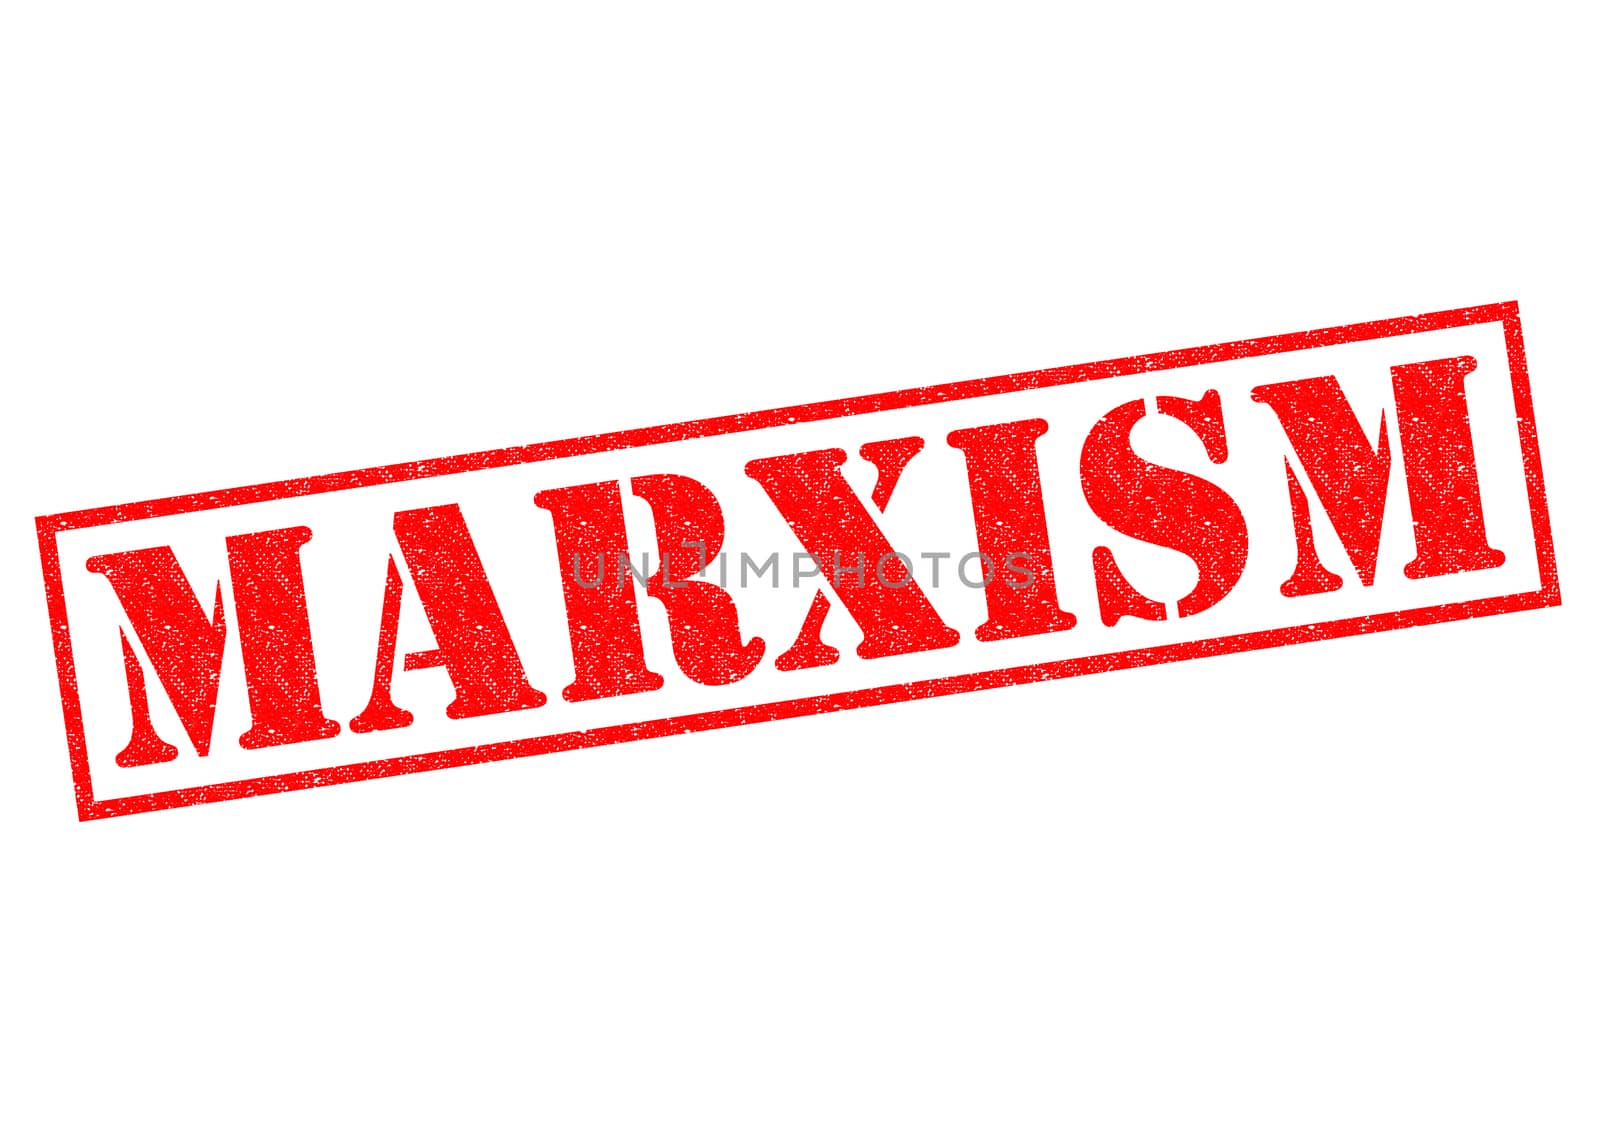 MARXISM red Rubber Stamp over a white background.